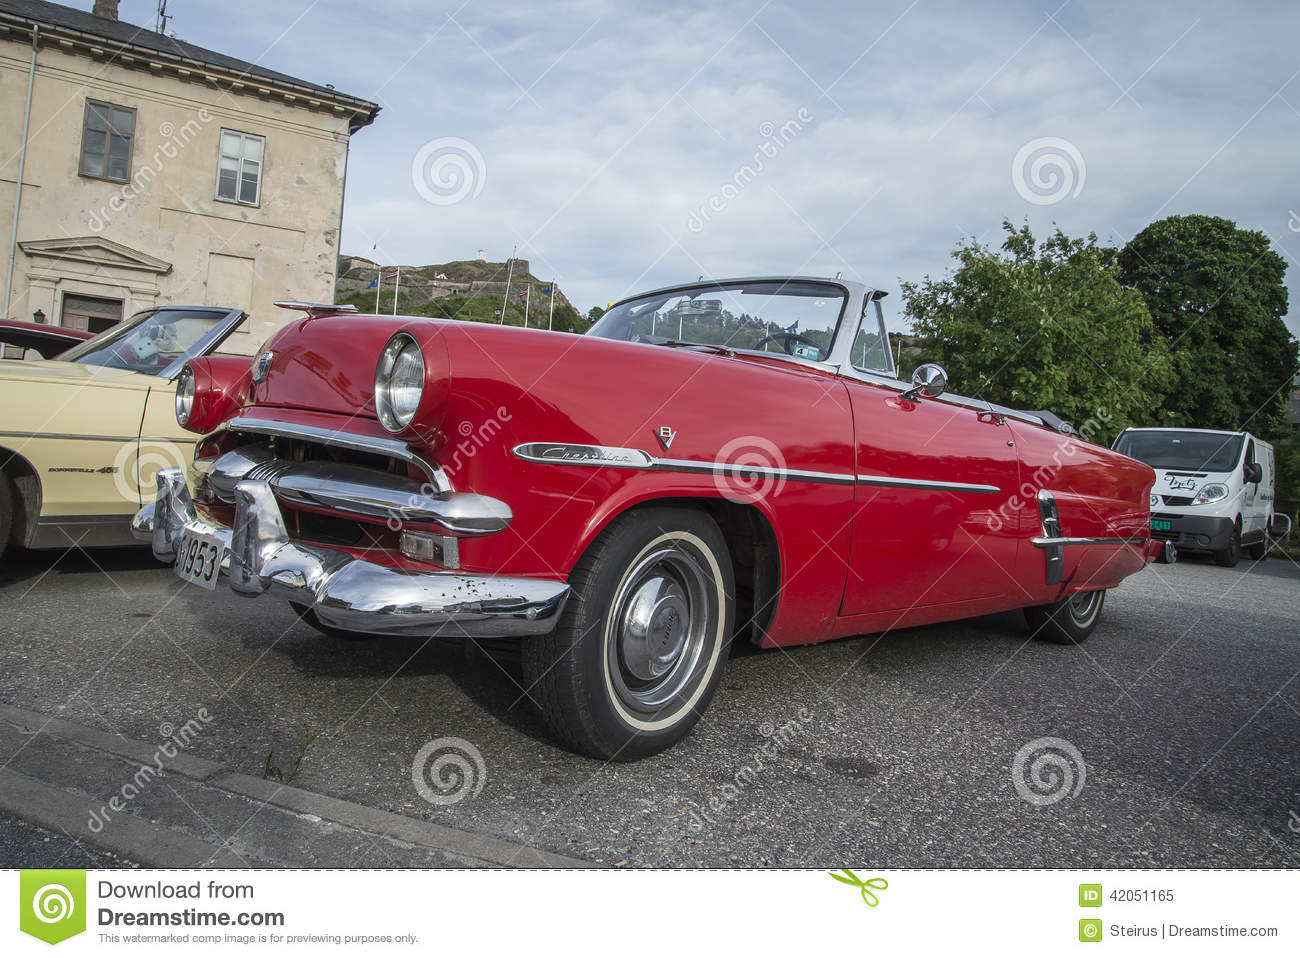 Amazing 1953 Ford Crestline Sunliner Convertible Pictures & Backgrounds